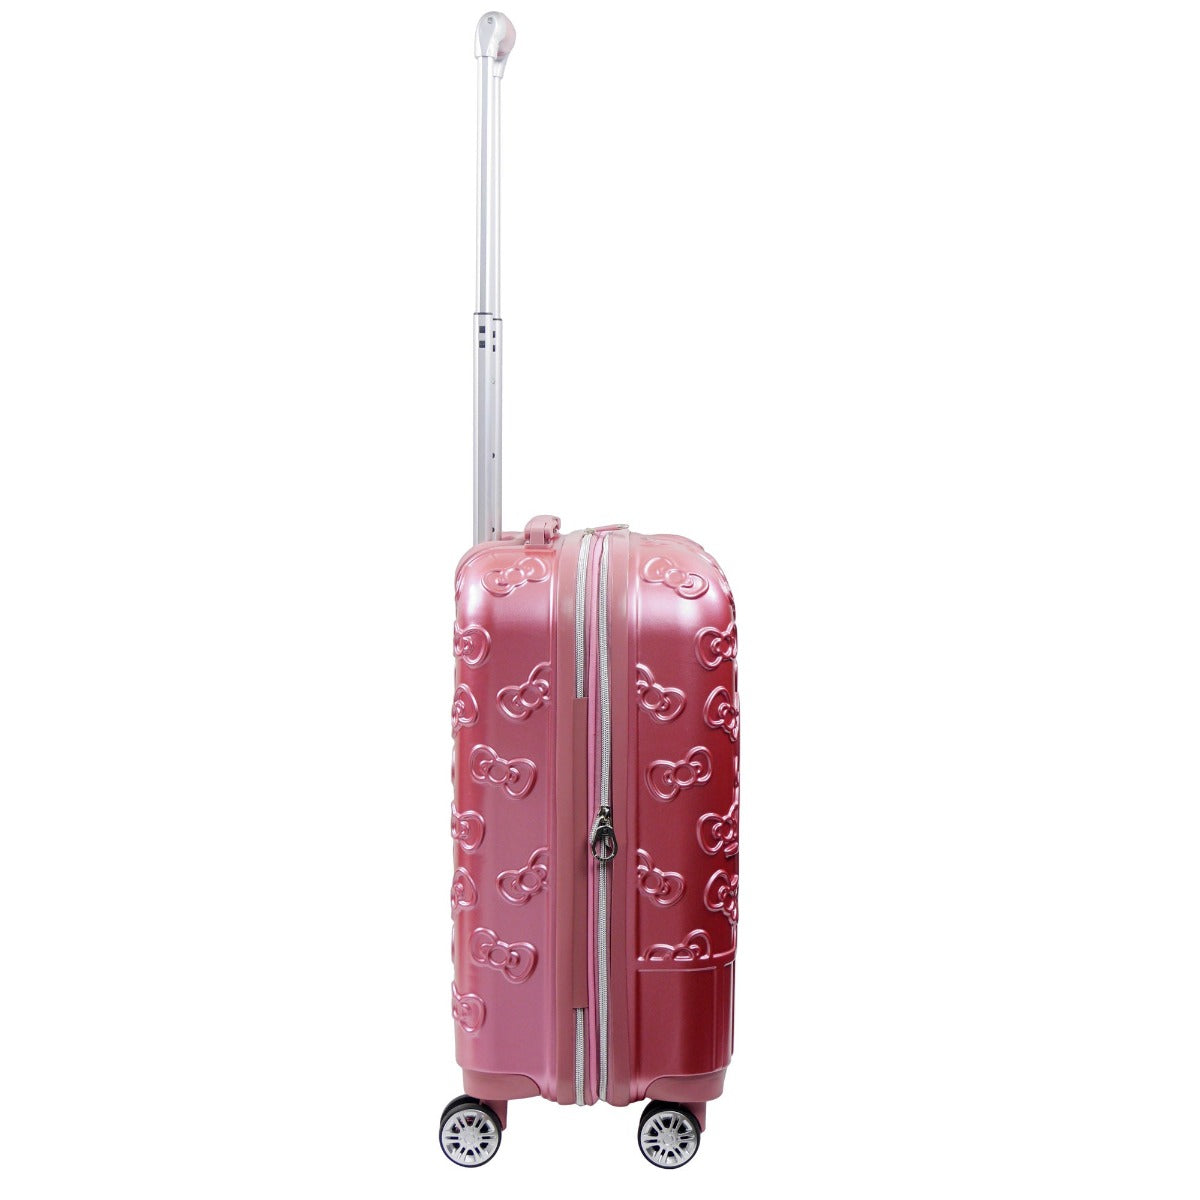 Ful X Hello Kitty Molded Portrait 22.5" pink spinner suitcase - best hard shell carry-on luggage for traveling